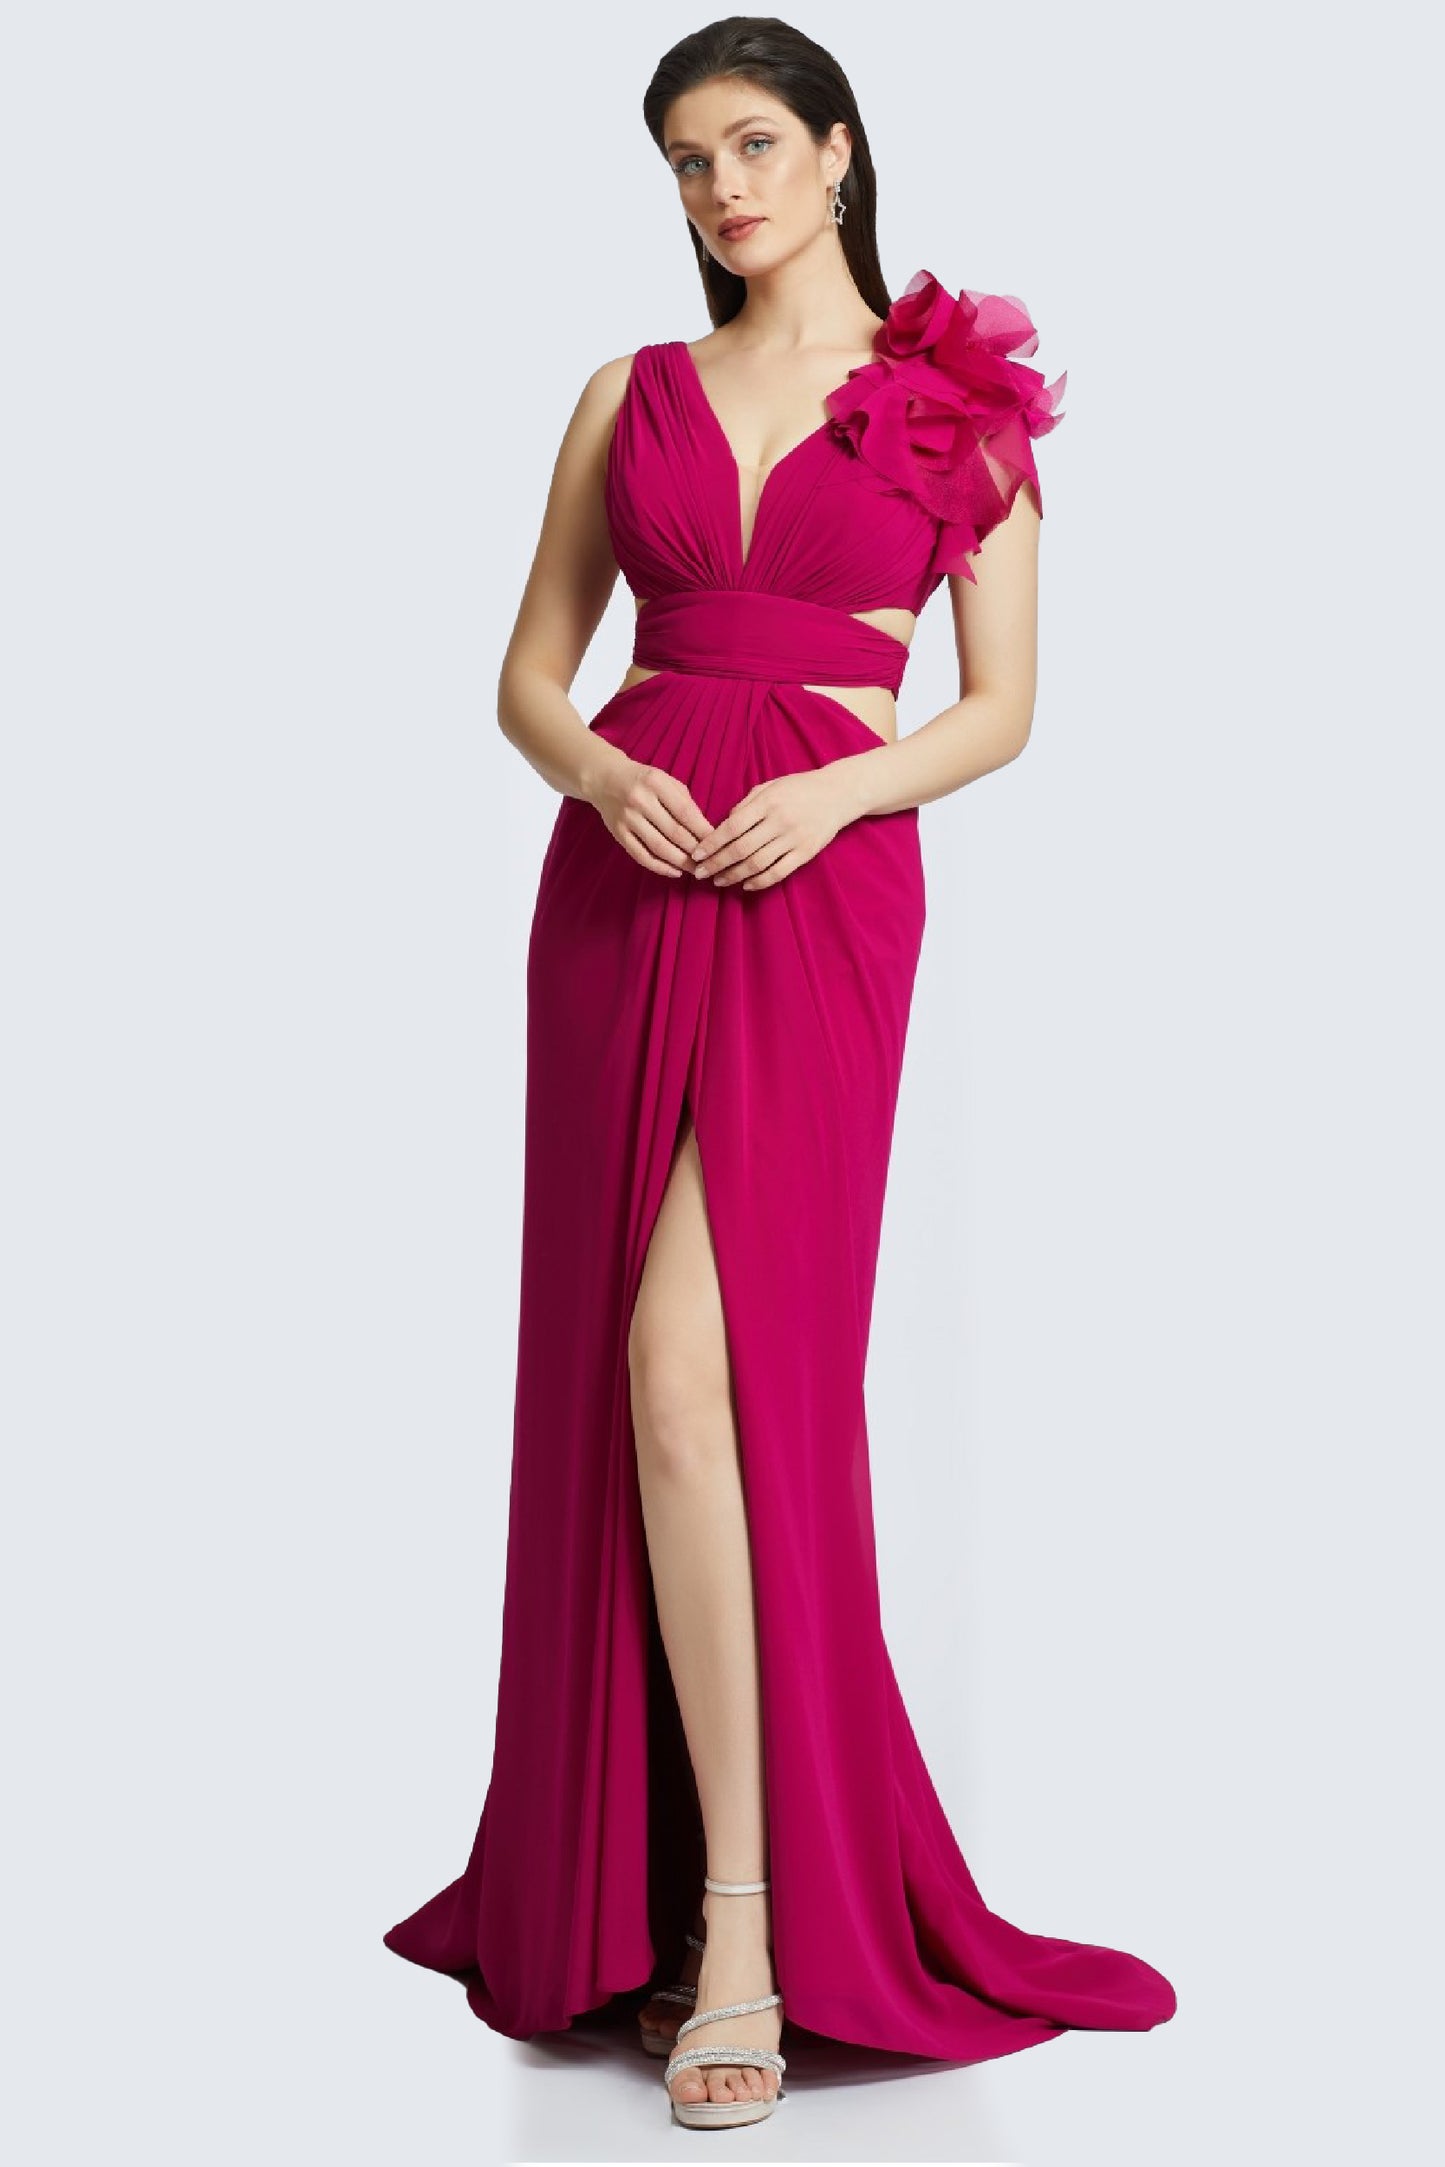 Judy - Mystic Evenings | Evening and Prom Dresses